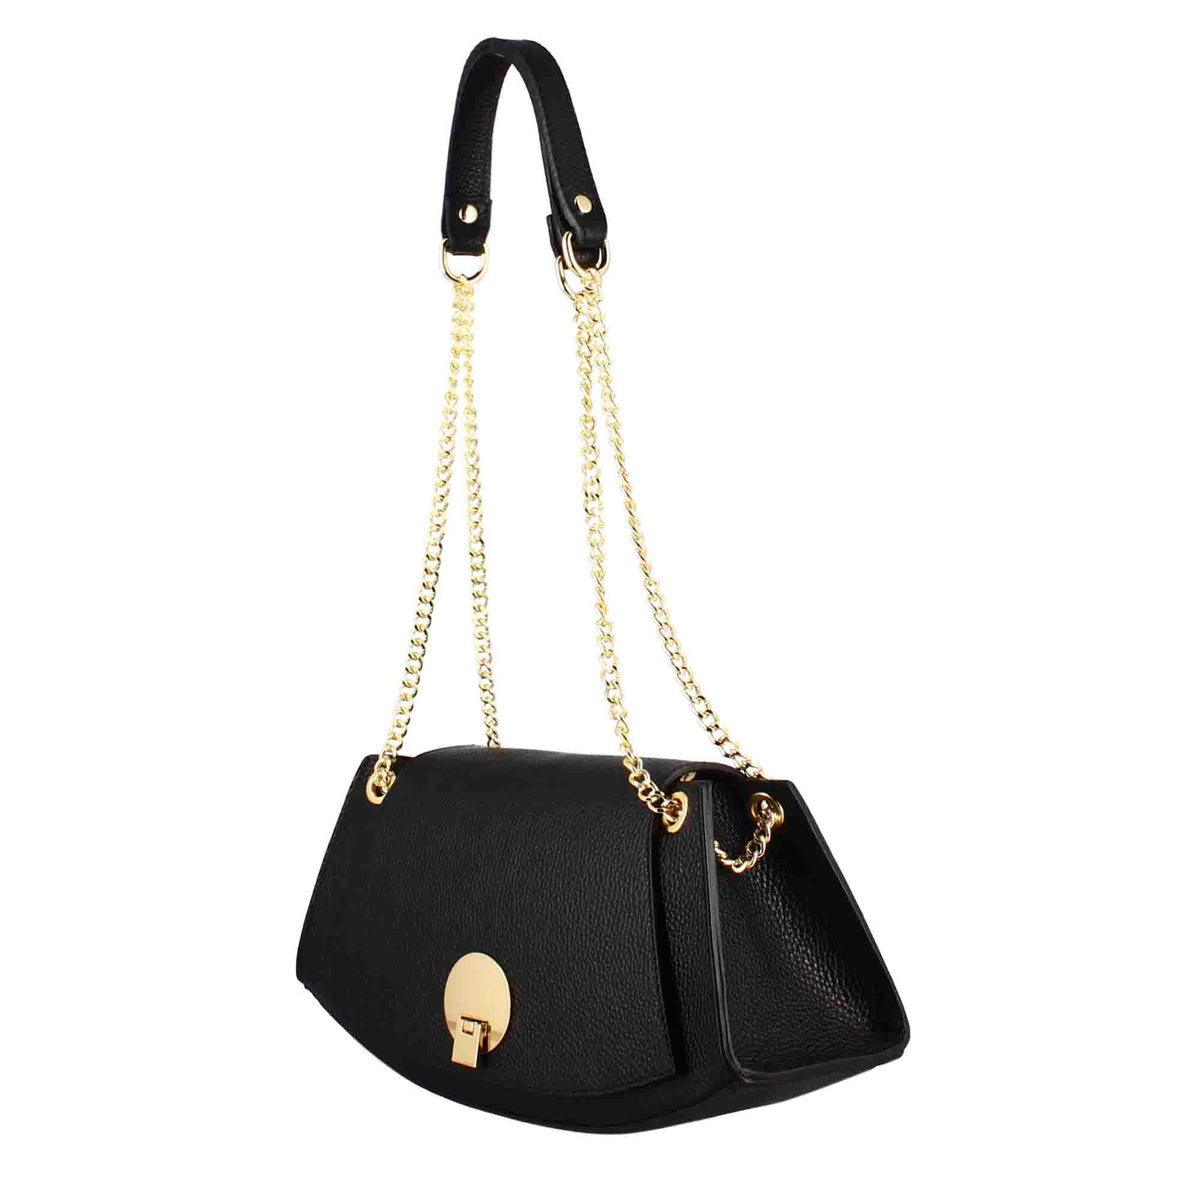 Women's leather shoulder bag with gold metal clasp